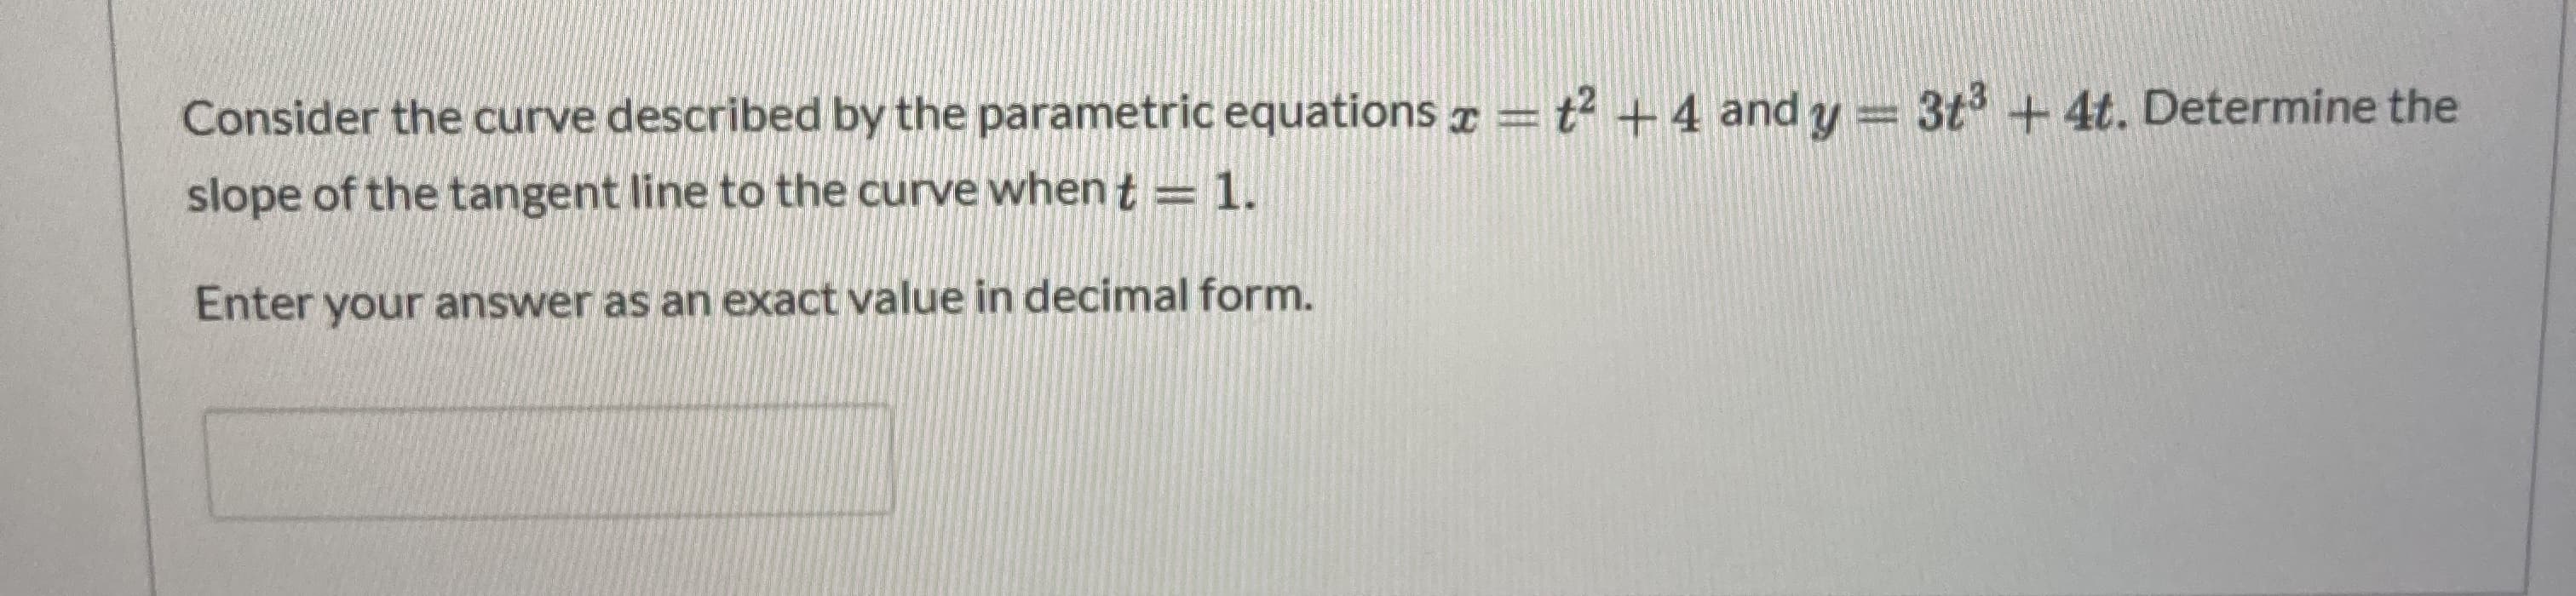 Consider the curve described by the parametric equations ¤ = t² +4 and y = 3t + 4t. Determine the
slope of the tangent line to the curve when t = 1.
Enter your answer as an exact value in decimal form.
